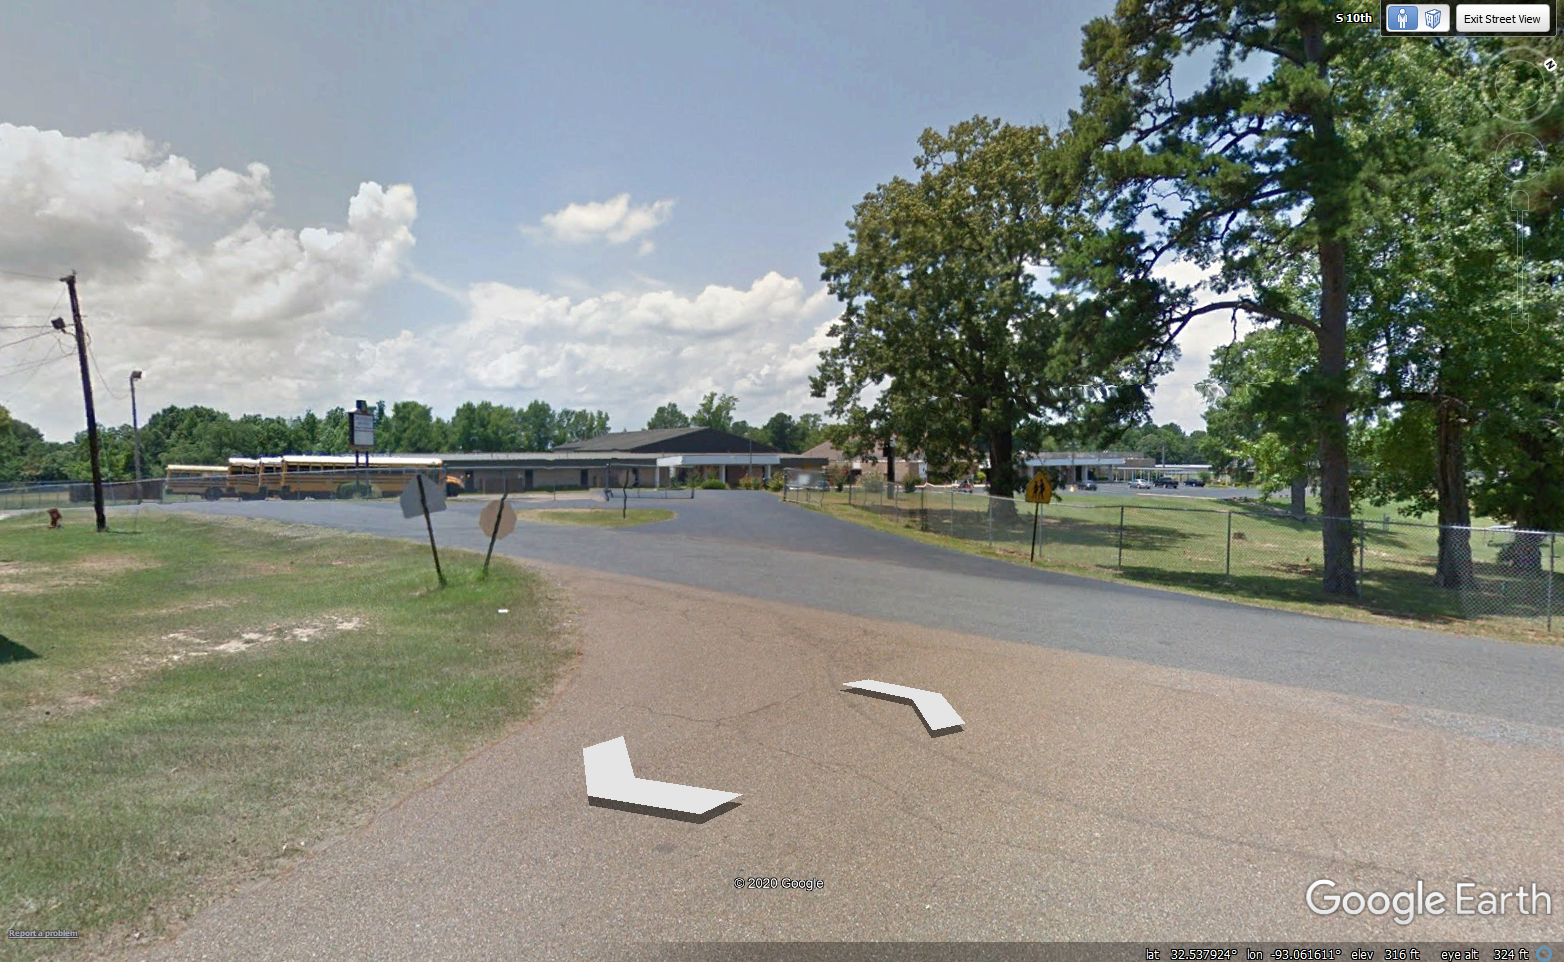 912-colemanstreet-view-22013png.png